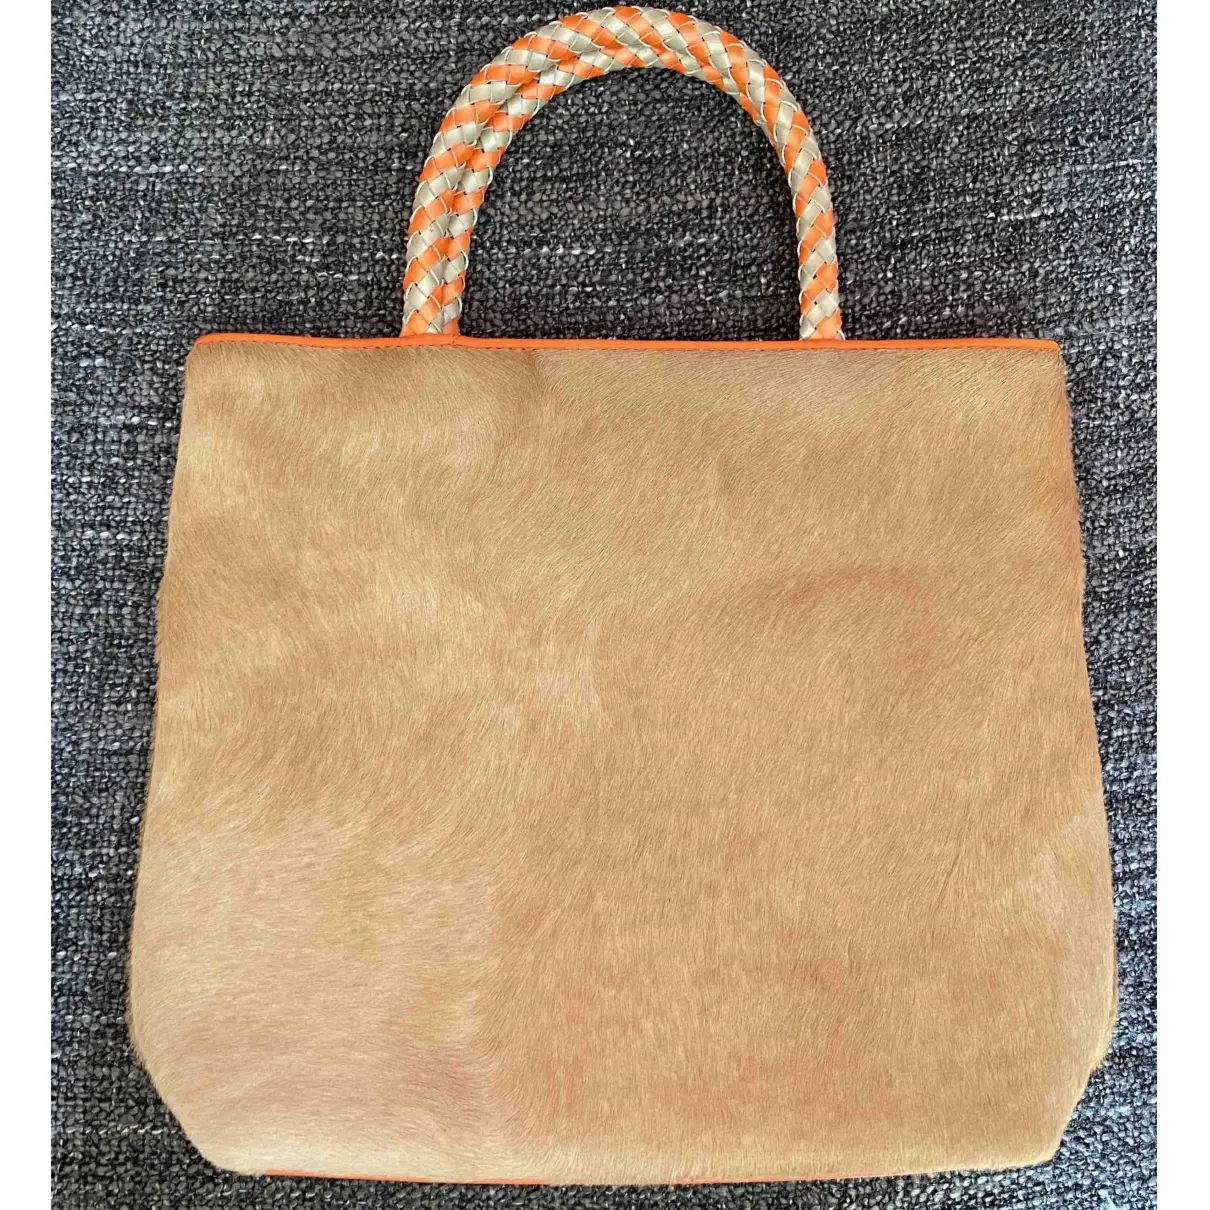 Christian Dior Pony-style calfskin tote for sale - Vintage